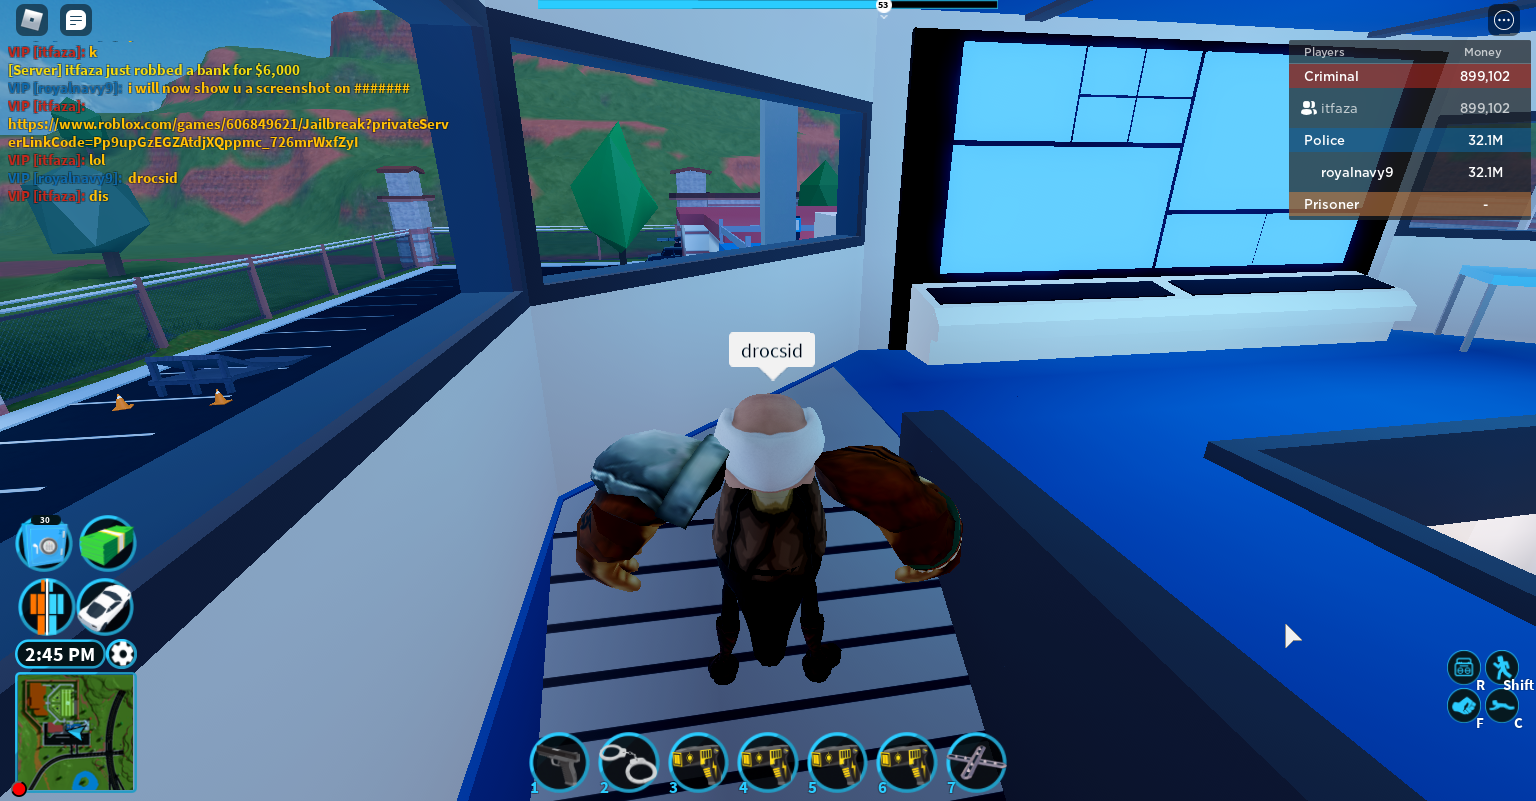 I Have Four Tazers Work Out How Fandom - https www roblox com games 606849621 jailbreak